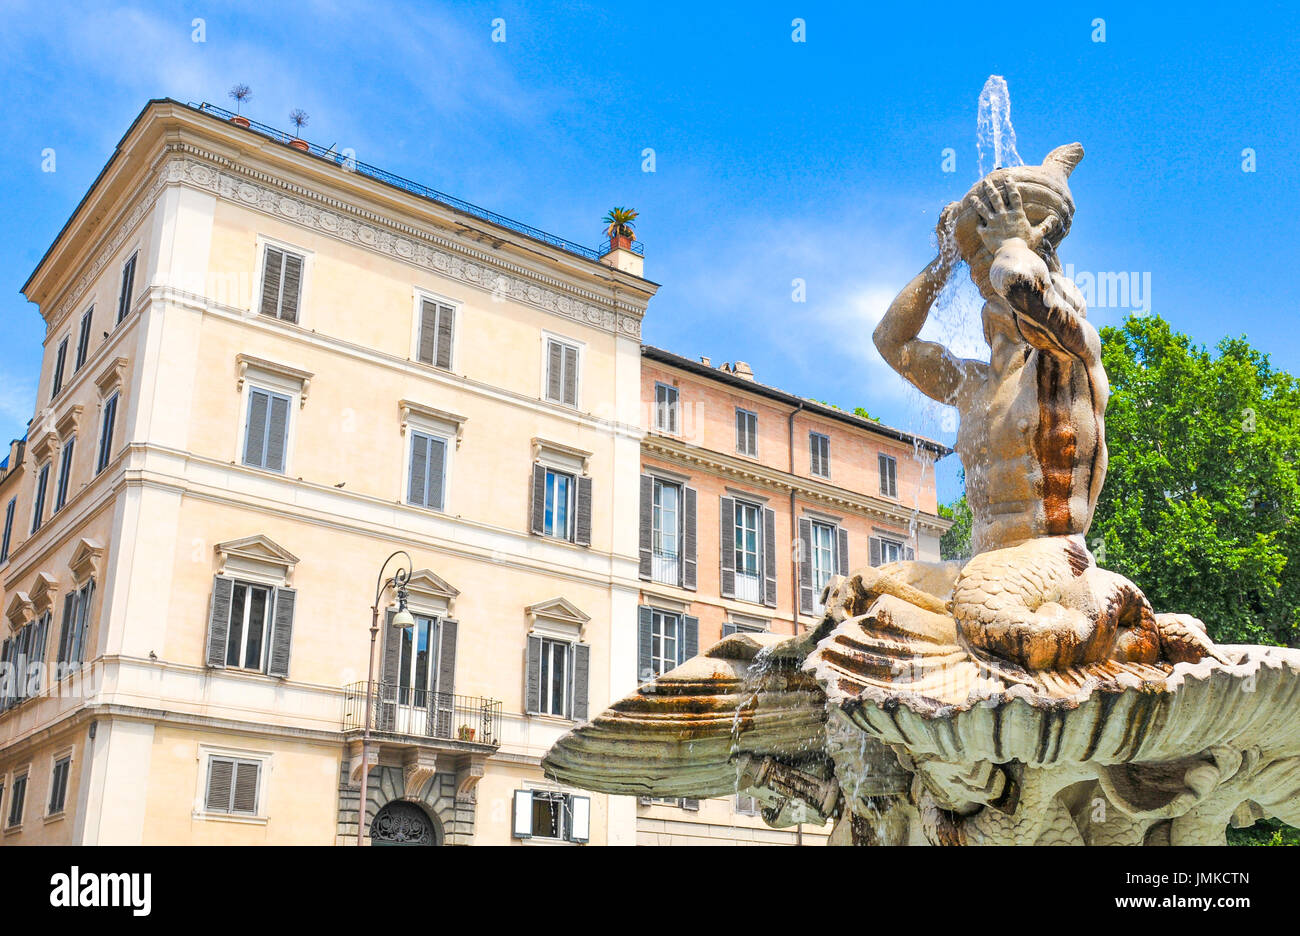 Architectural detail of fountain in Rome, Italy Stock Photo